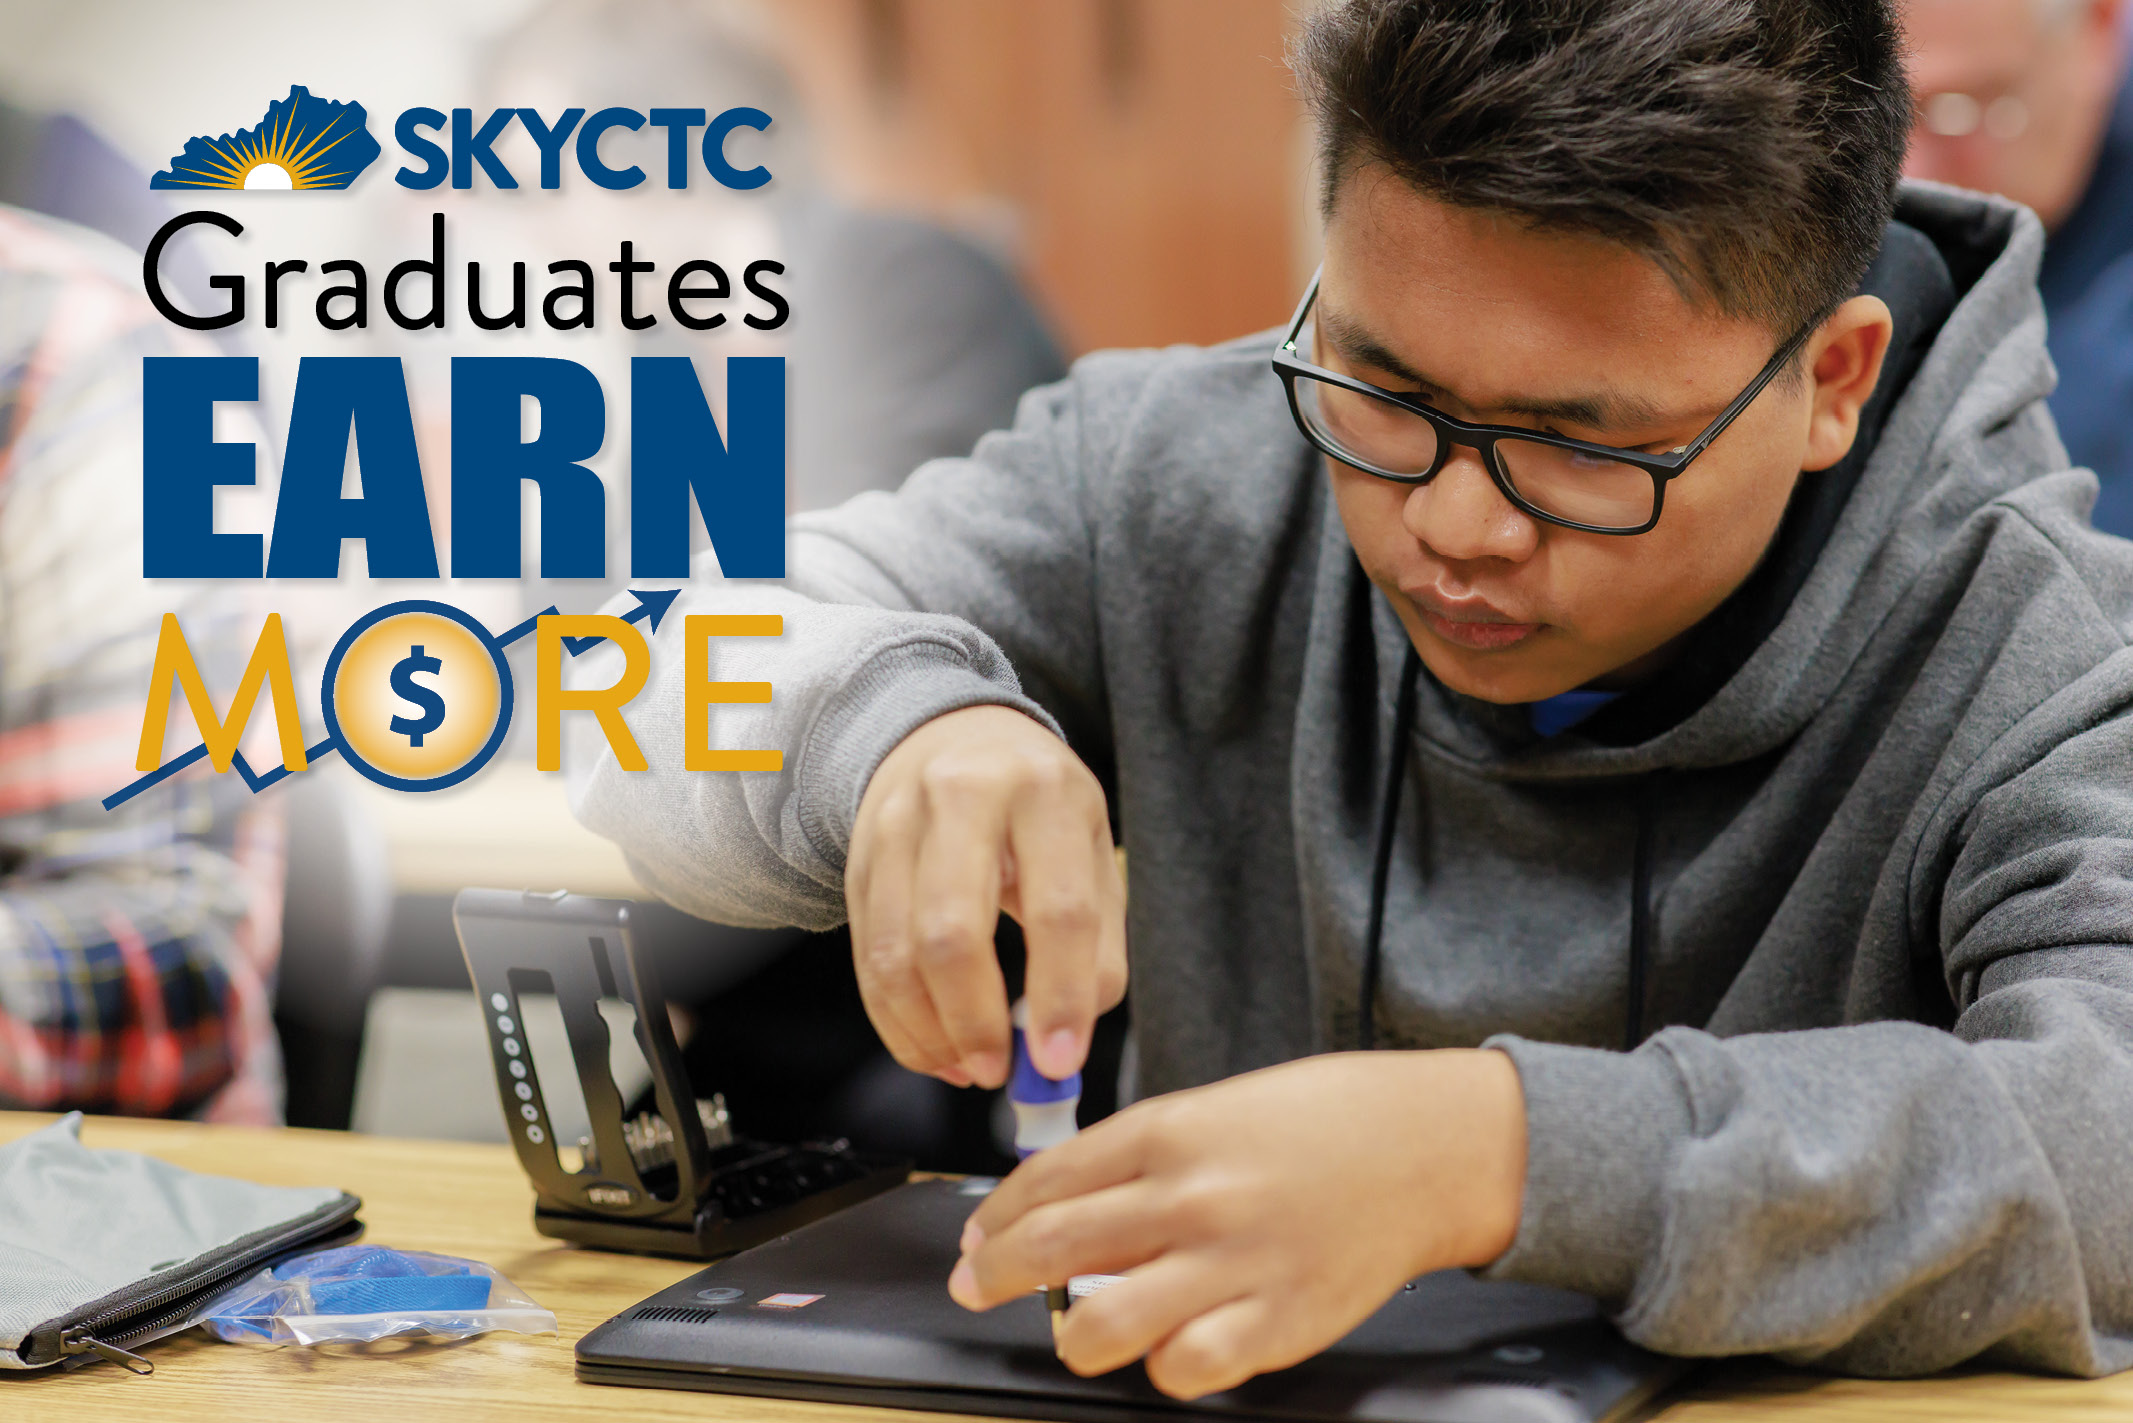 Student working on a computer because  SKYCTC graduates earn more.